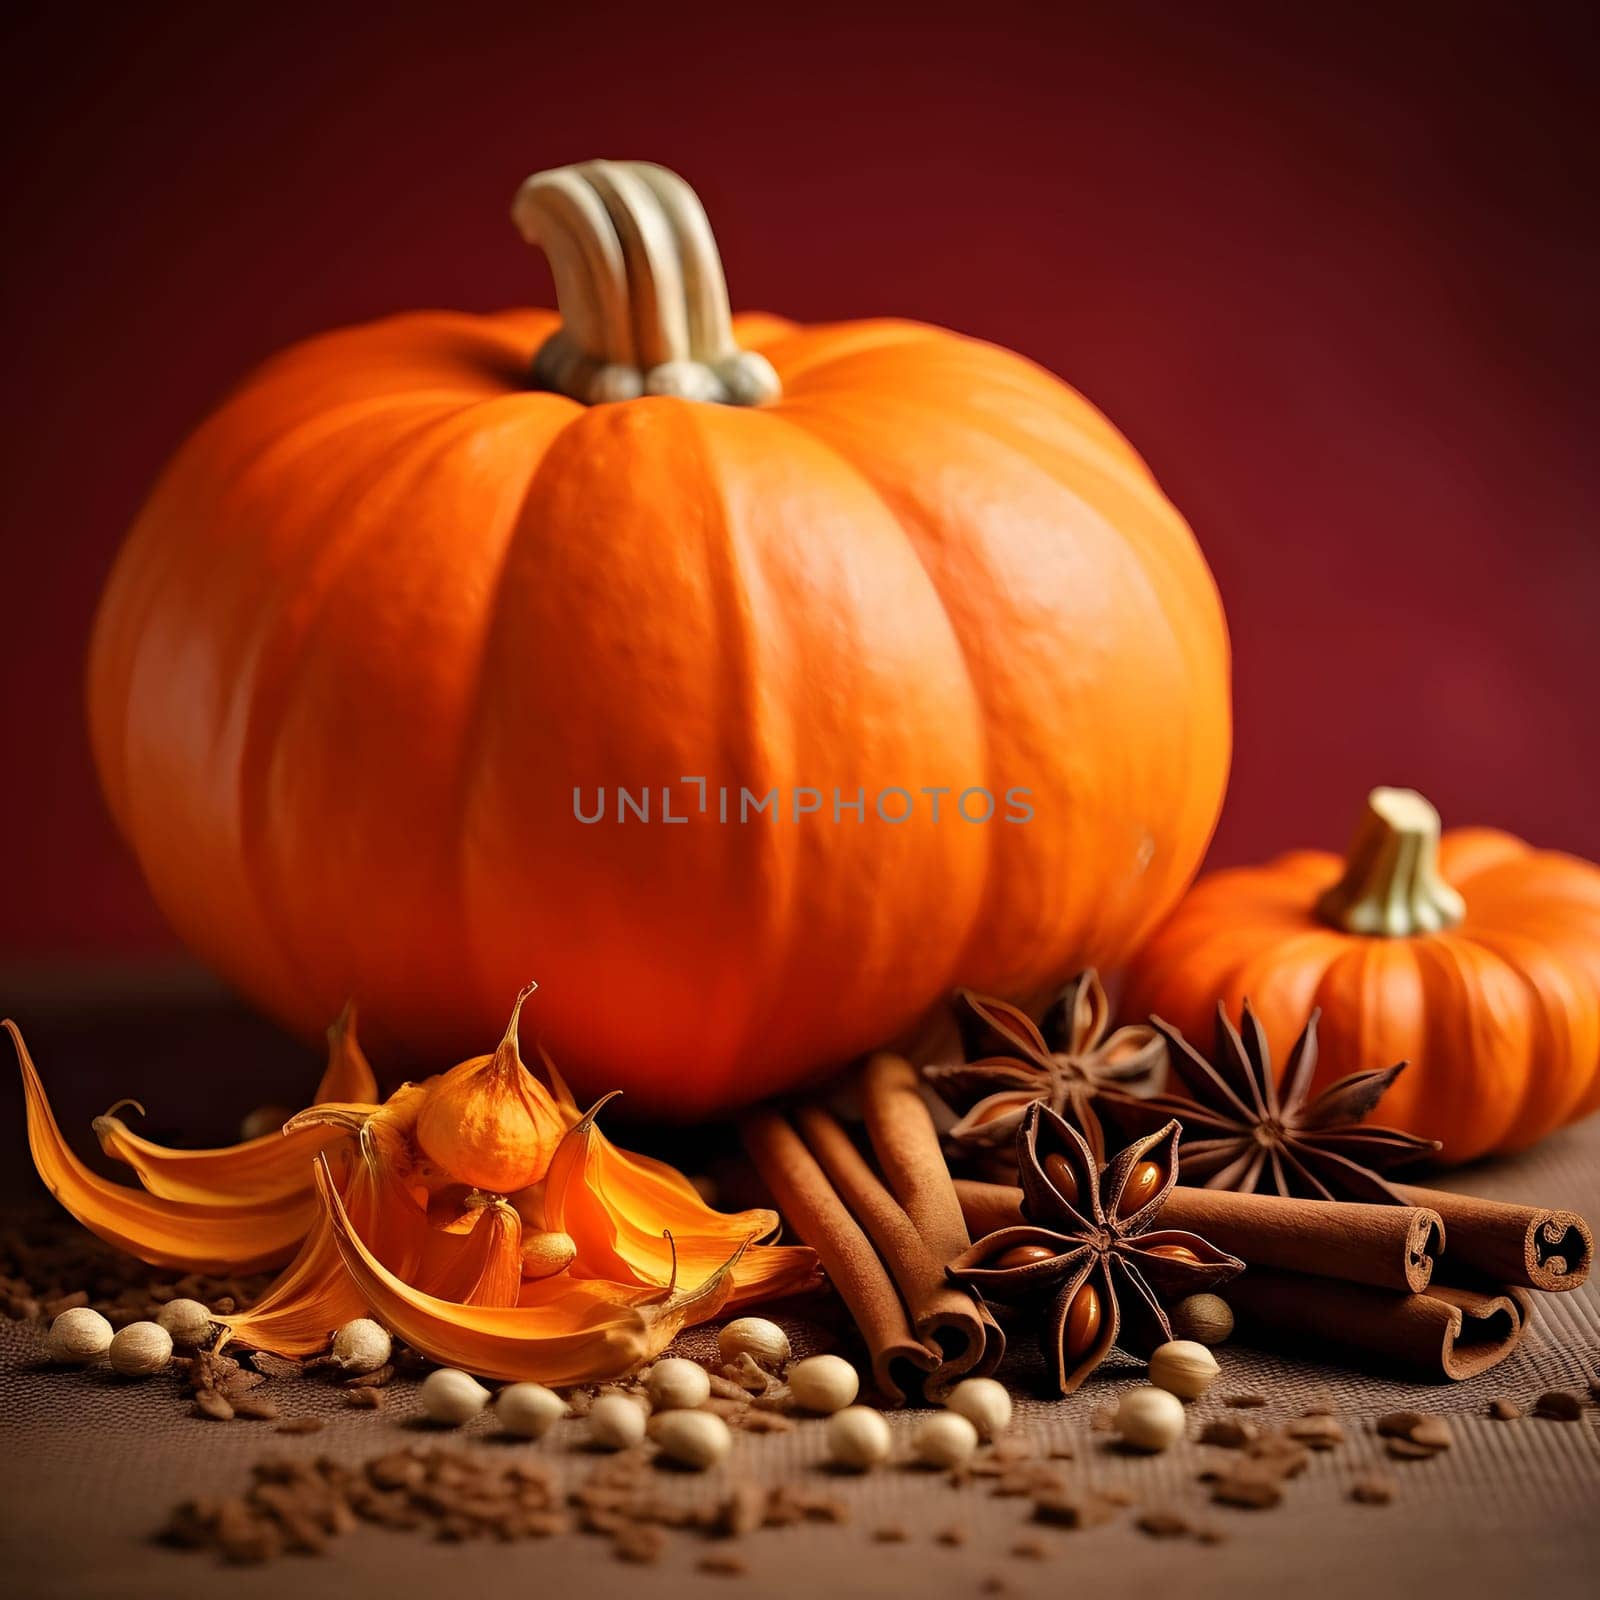 Elegantly arranged pumpkins. Around pumpkin scrapings on a dark background. Pumpkin as a dish of thanksgiving for the harvest. An atmosphere of joy and celebration.